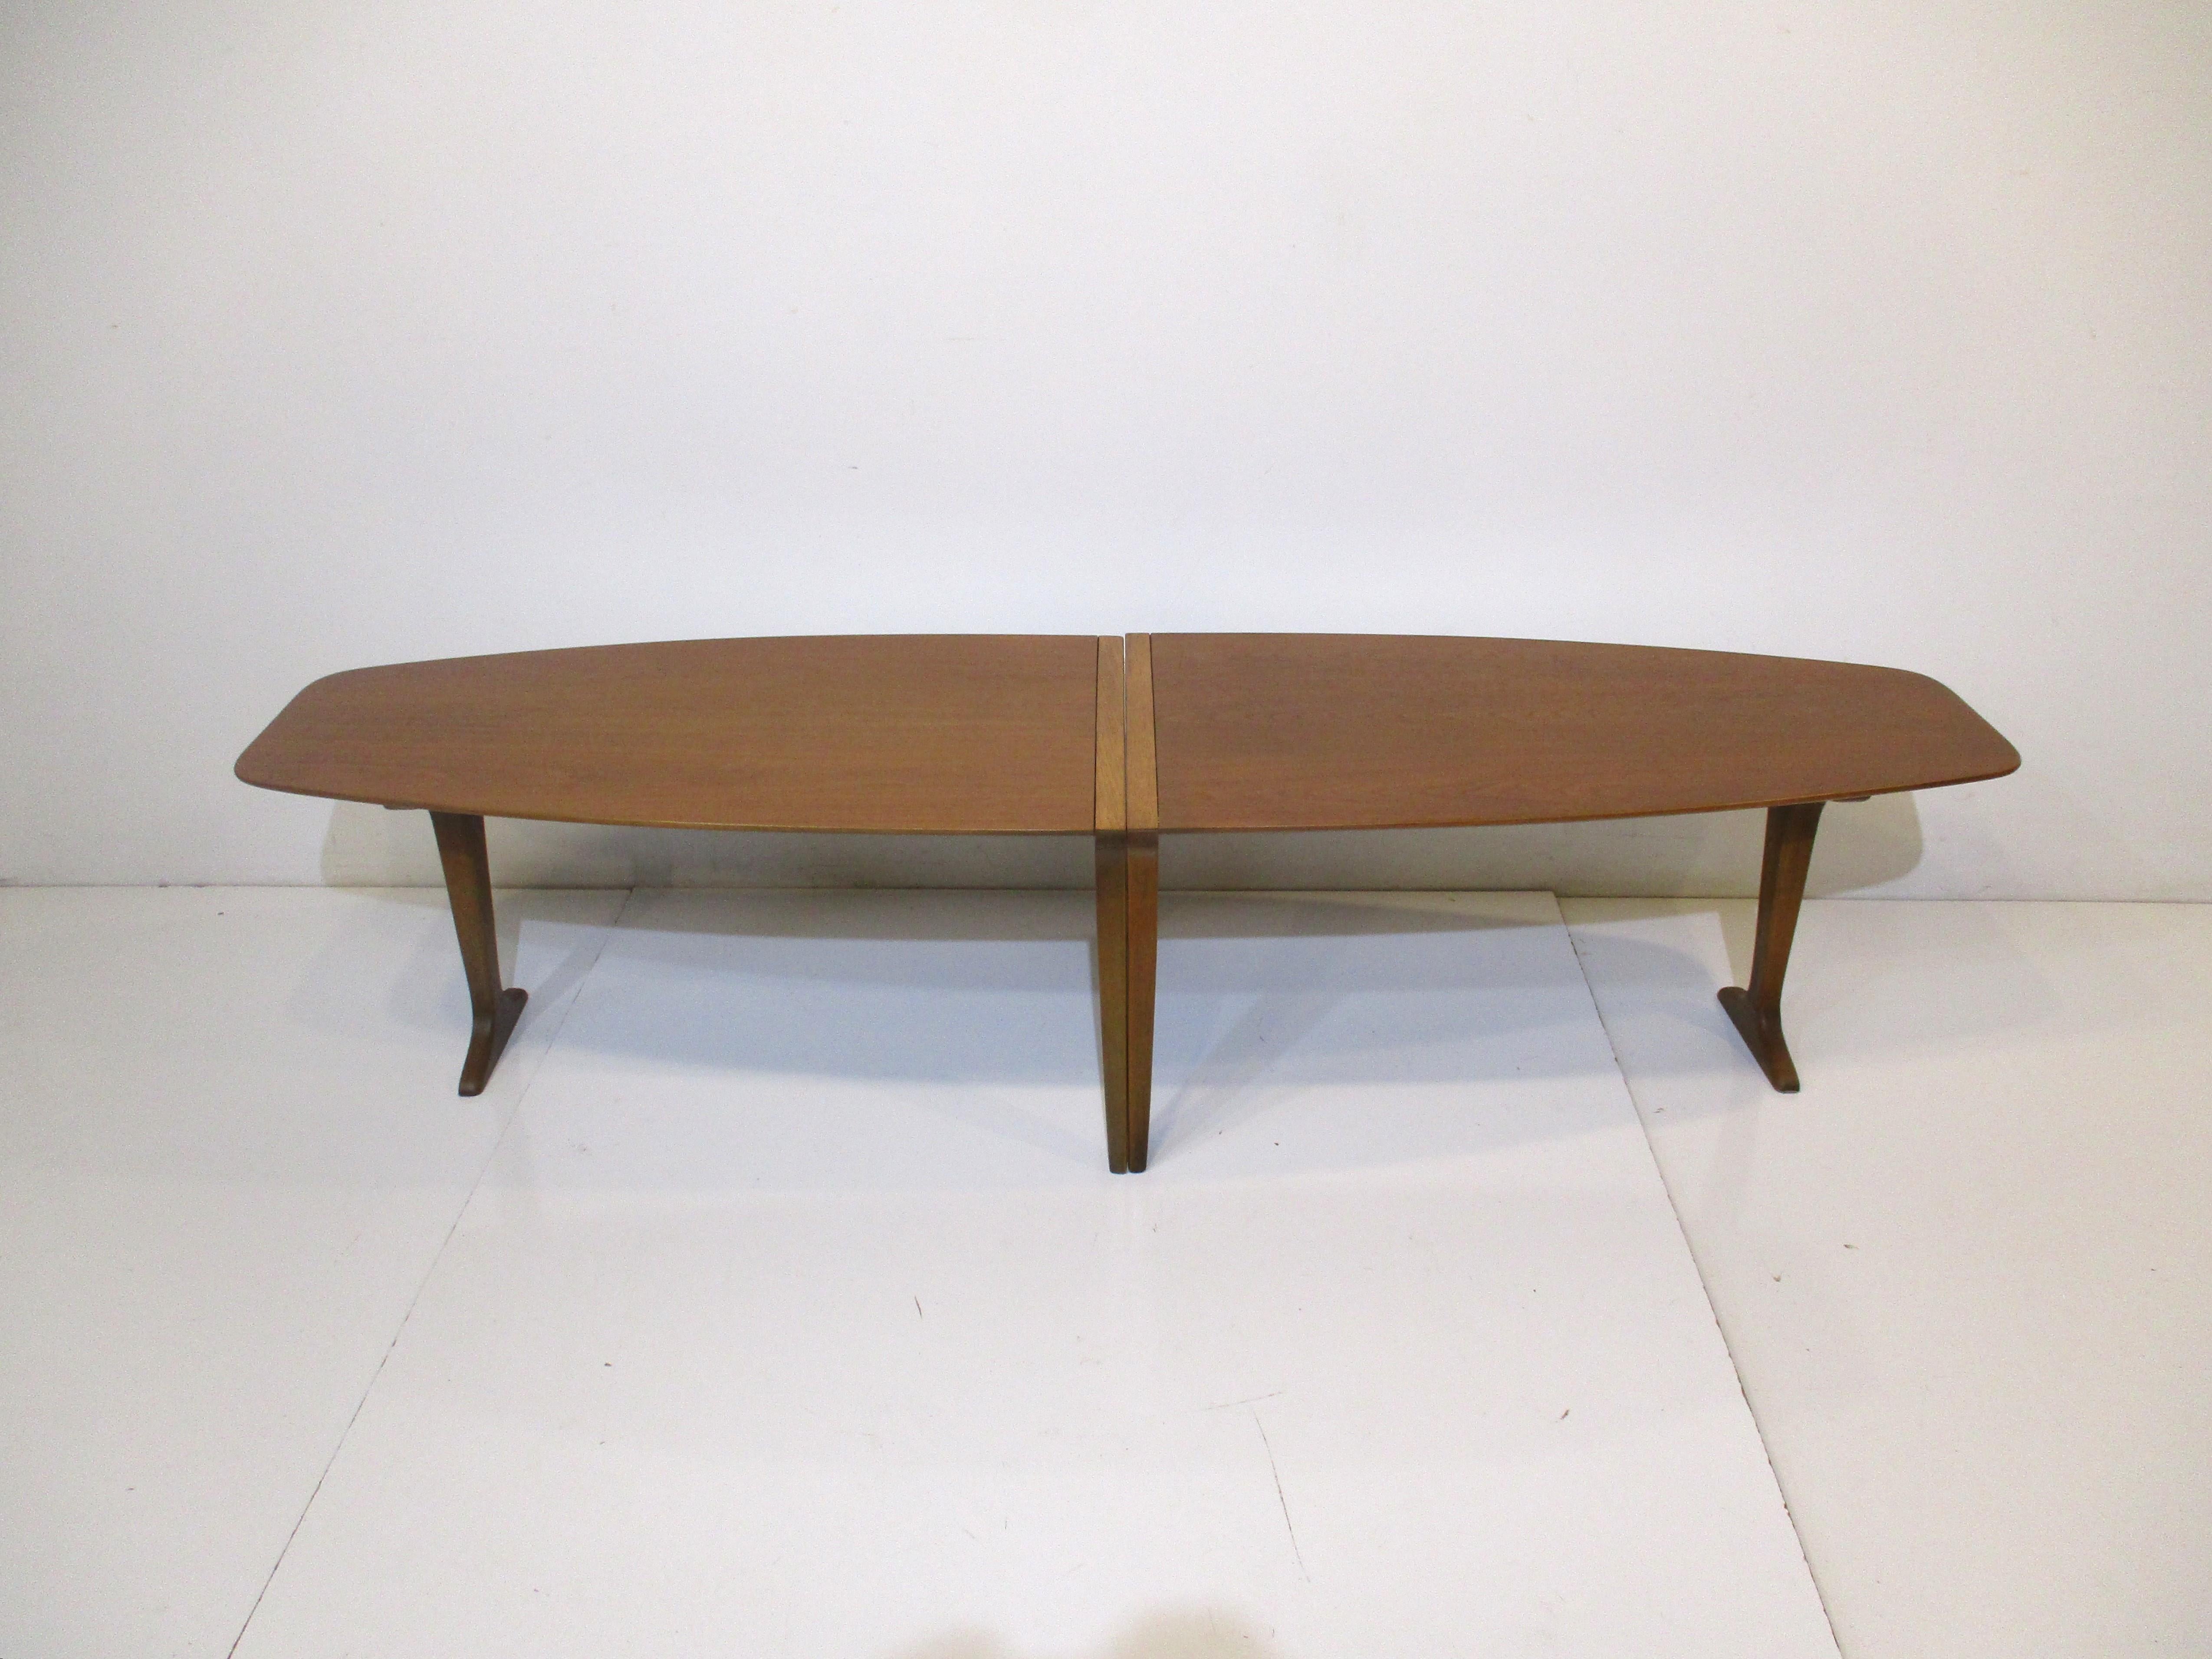 A well crafted two piece mahogany and walnut coffee table with tapered ends and middle legs , the other legs are a T styled design . The top has great graining with nice details a very rare design by John Van Koert manufactured by the Drexel